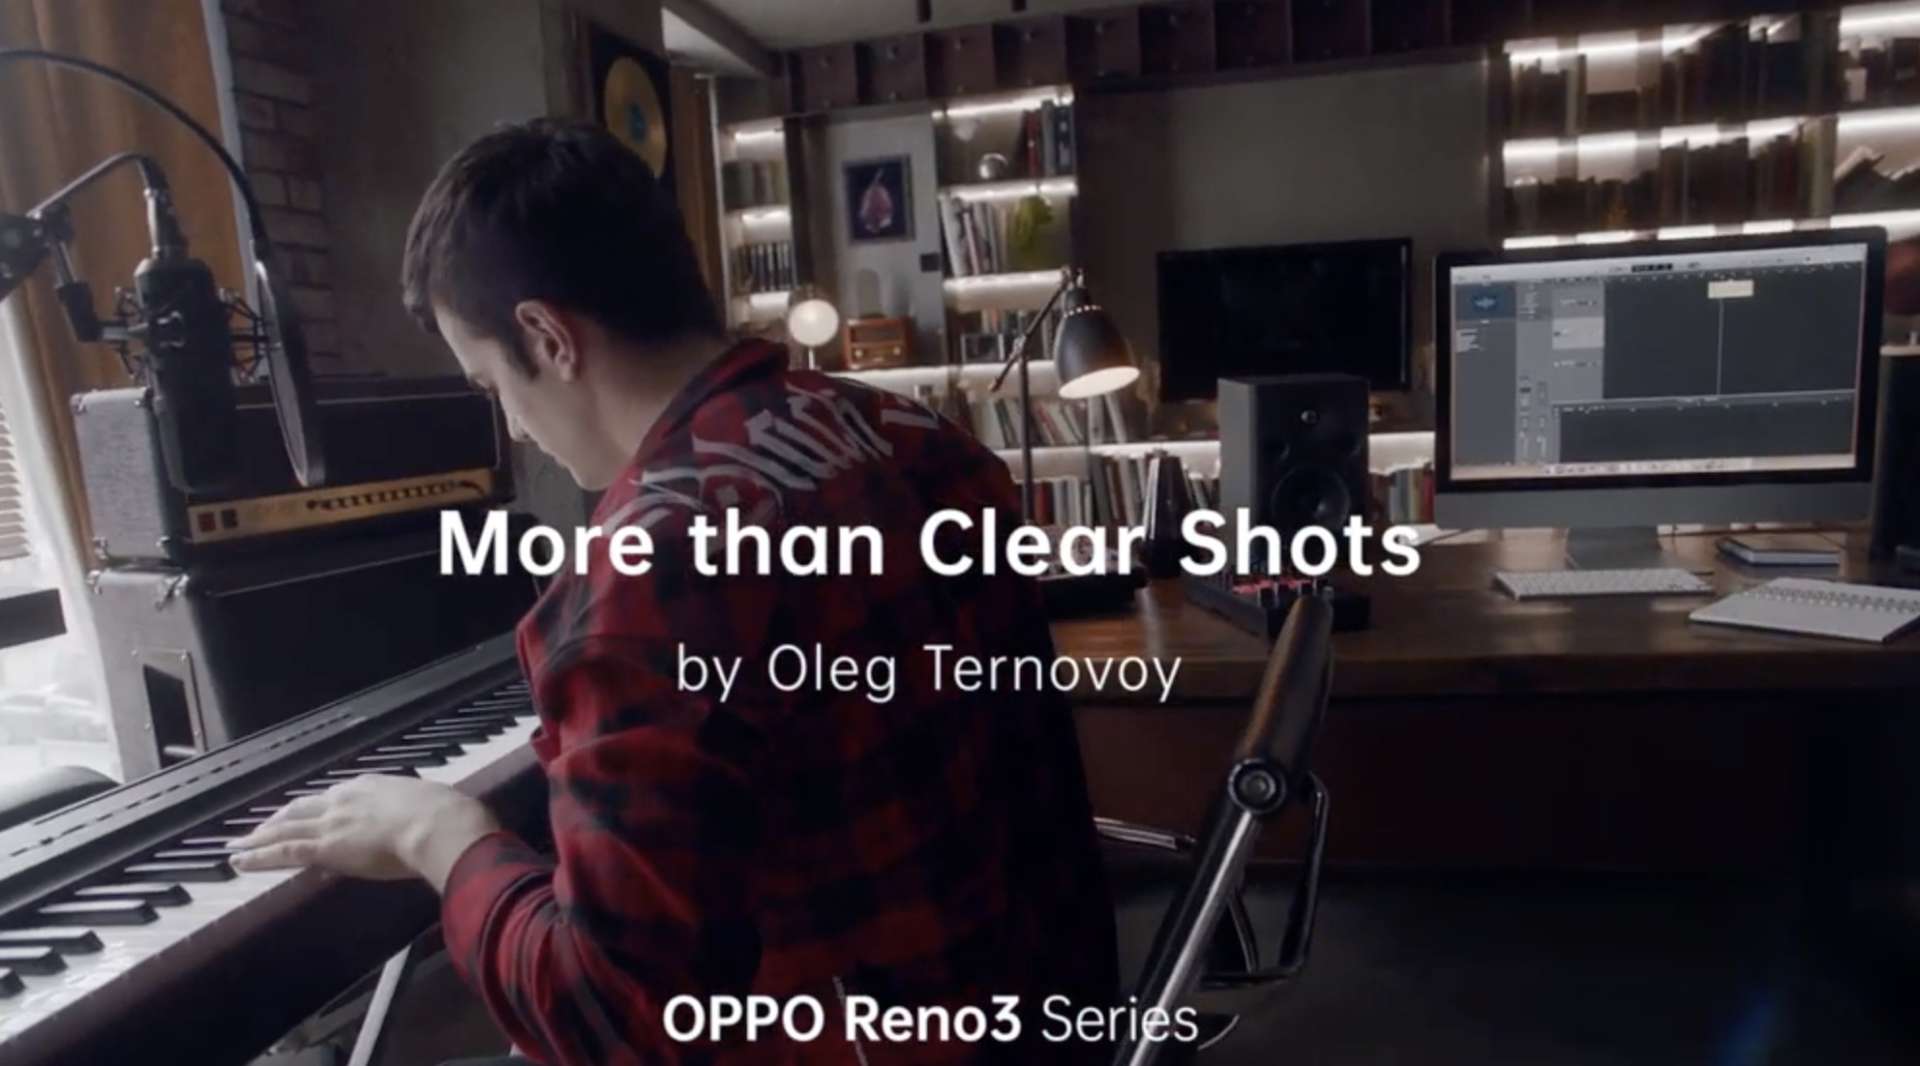 OPPO Reno3 - More than Clear Shots